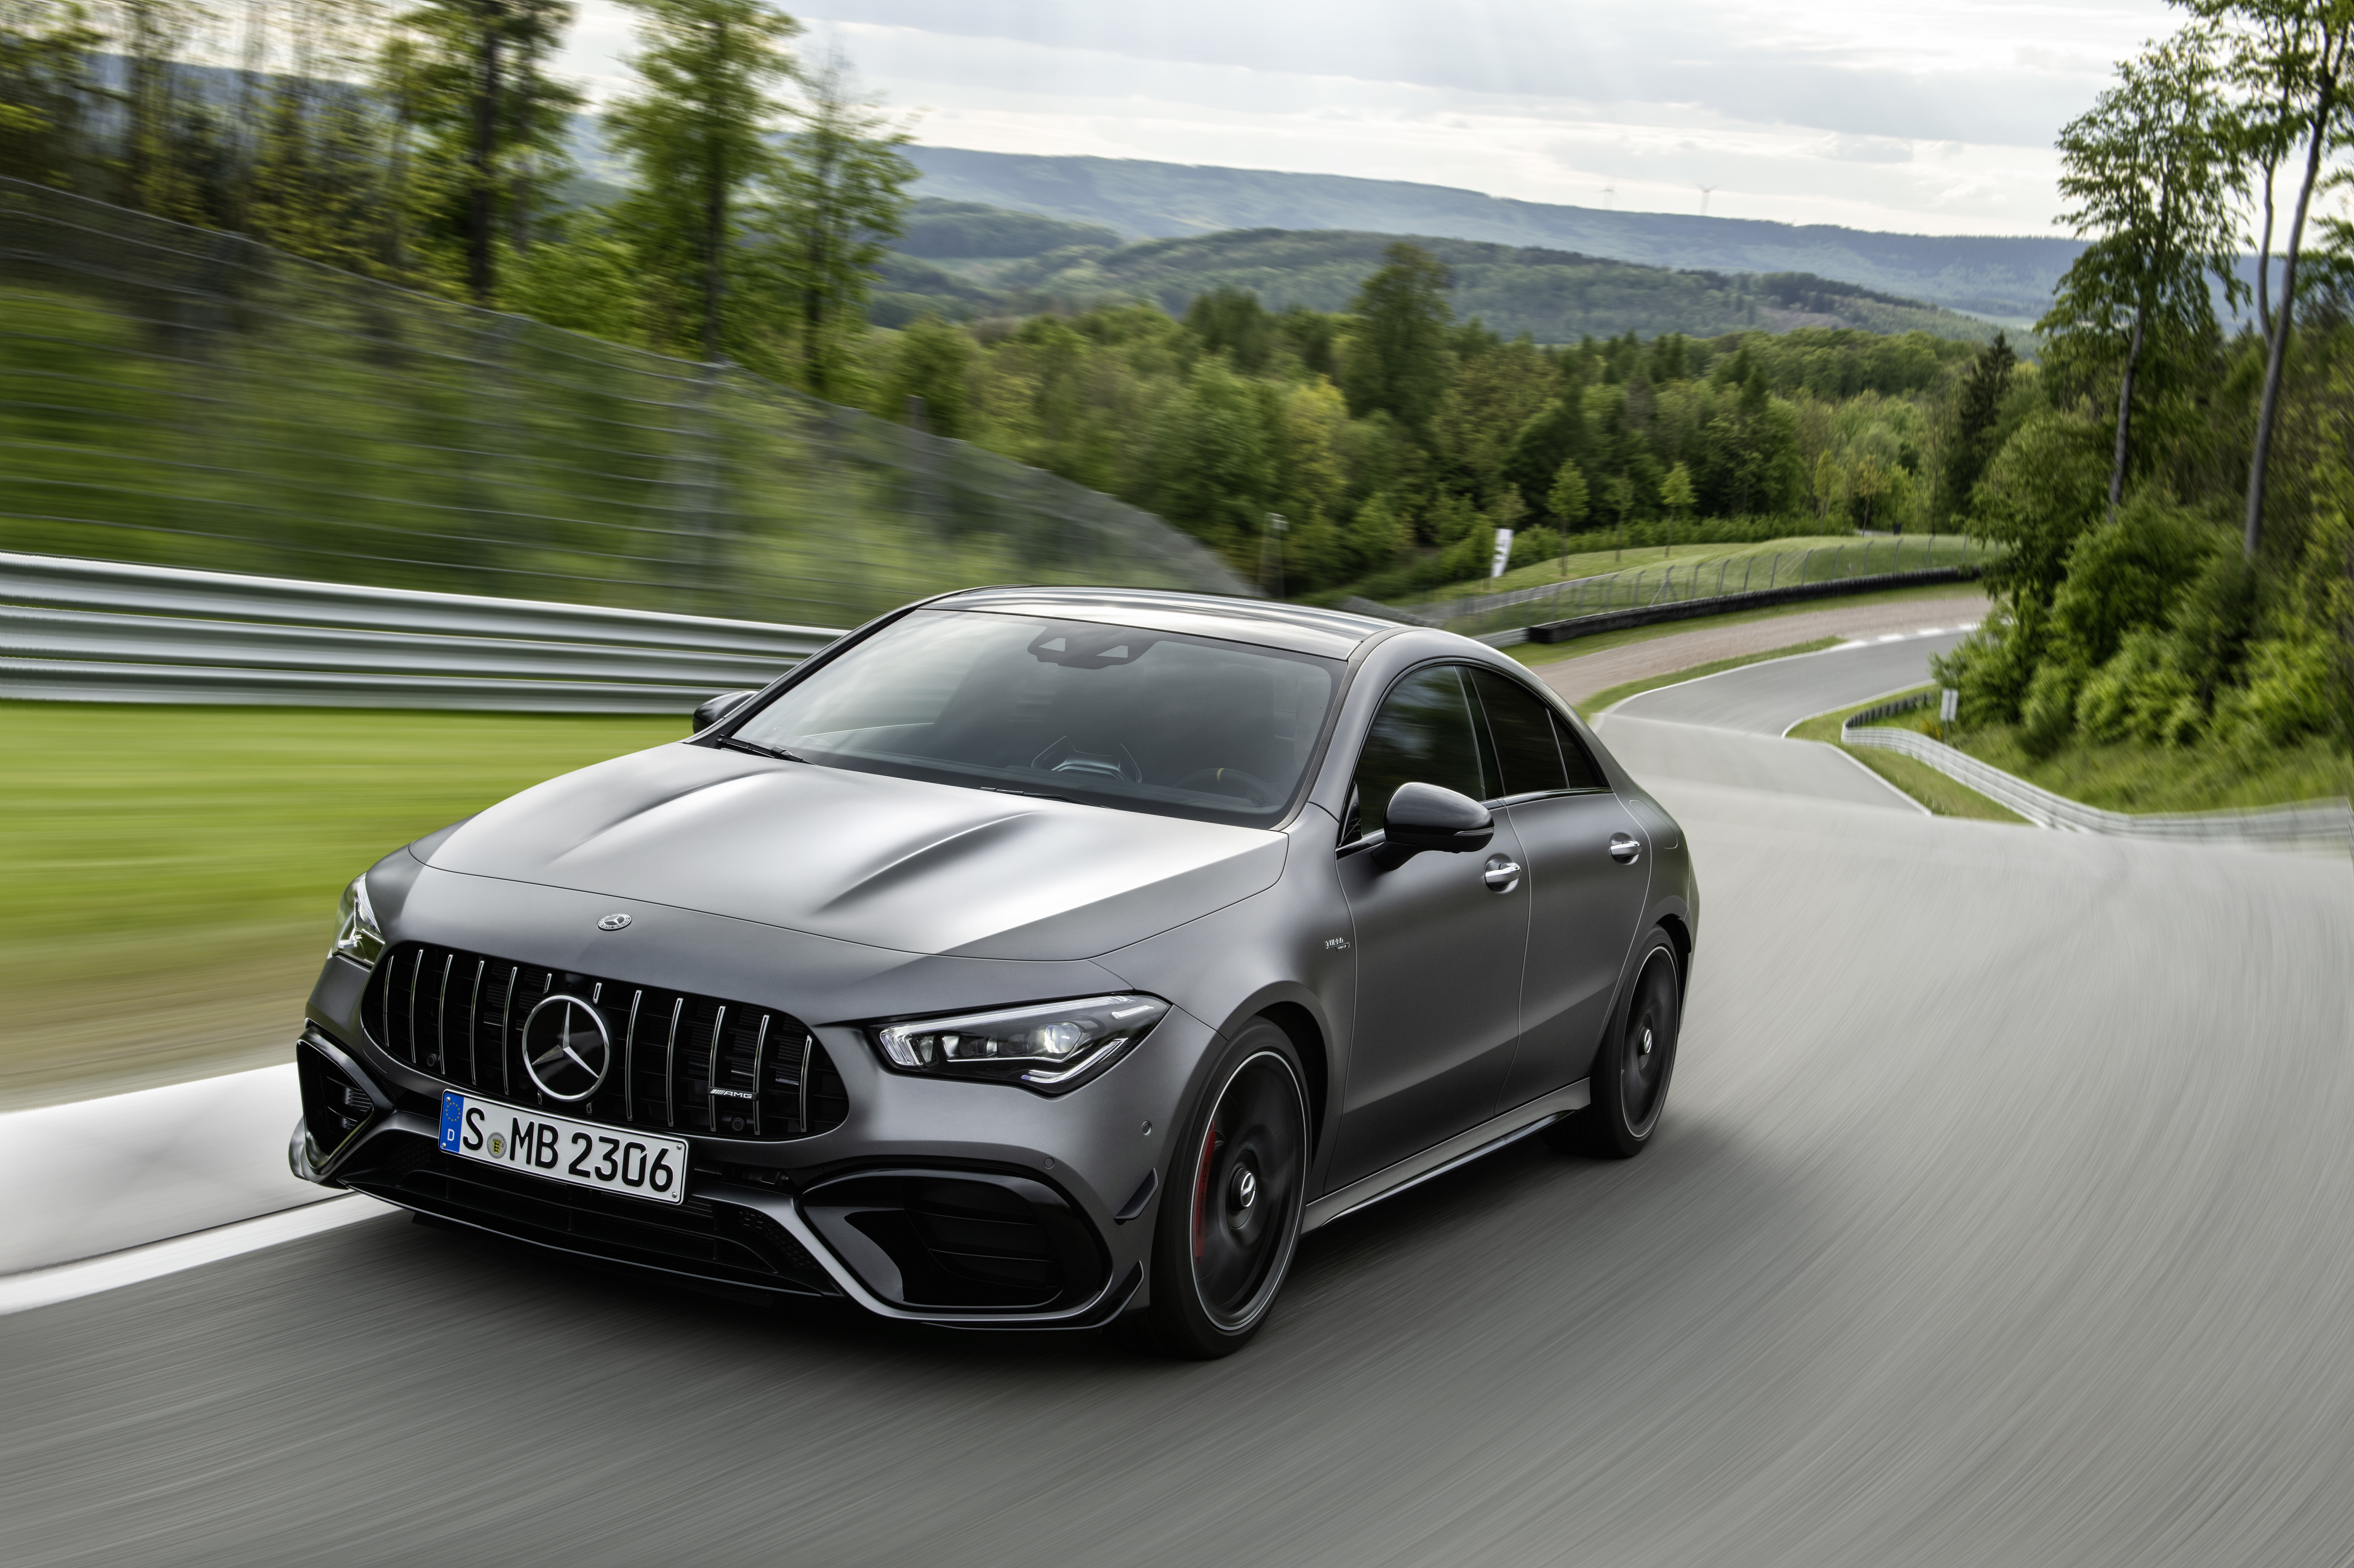 The CLA45 gets the same powertrain as the A45